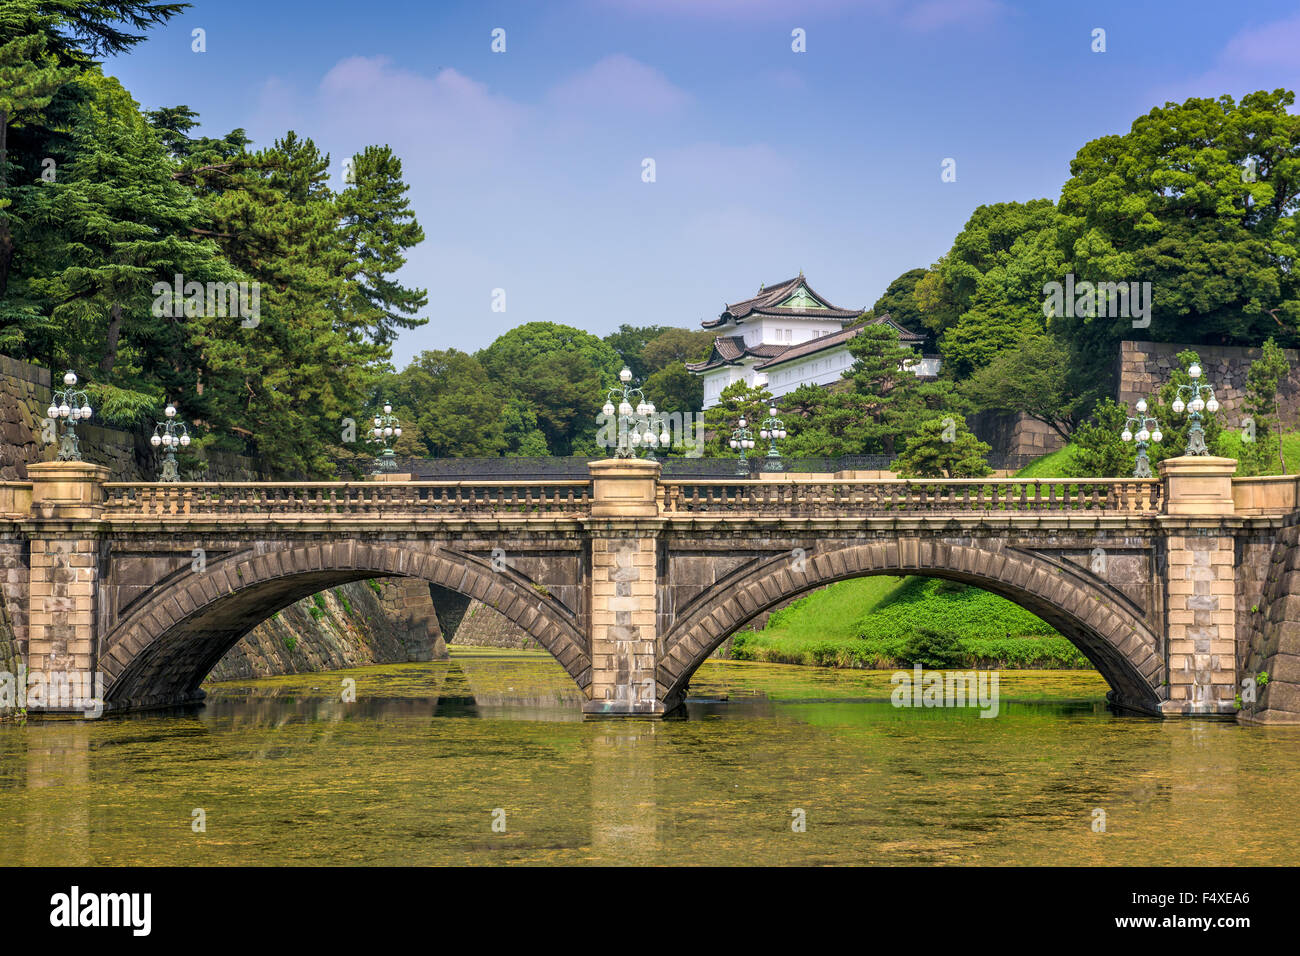 Tokyo Imperial Palace of Japan. Stock Photo